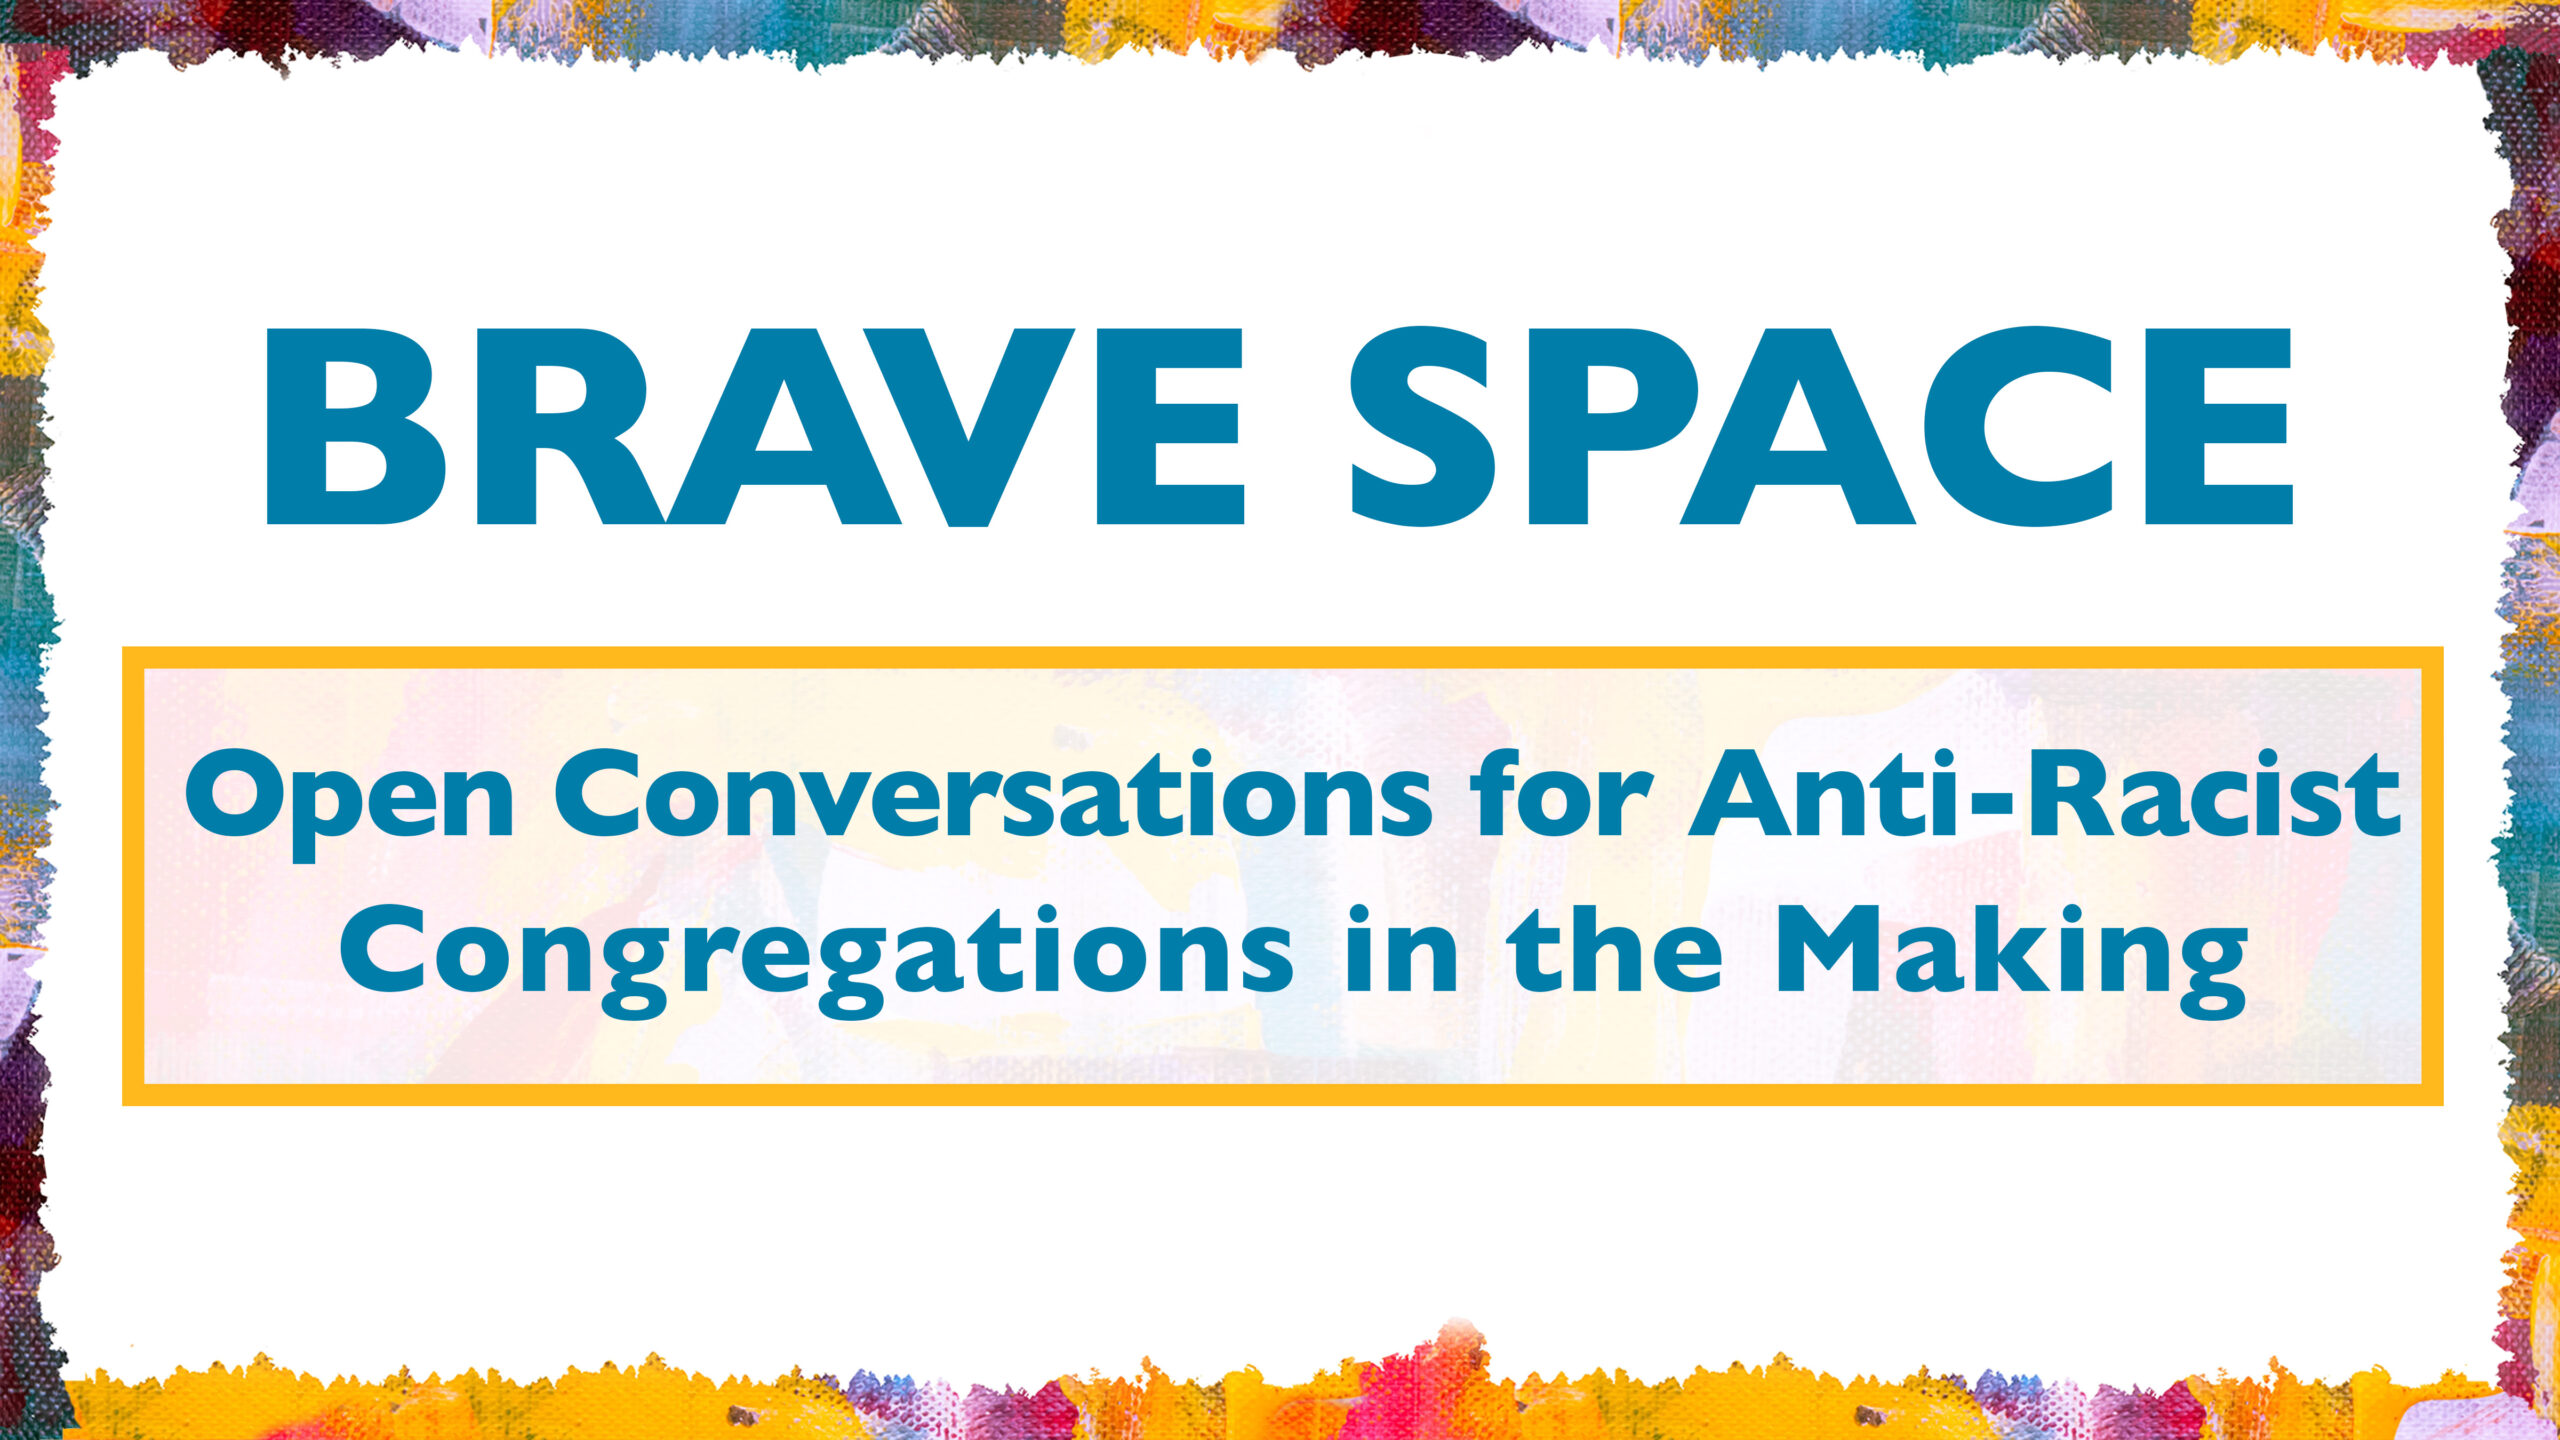 Brave Space: Open Conversations for Anti-Racist Congregations in the Making